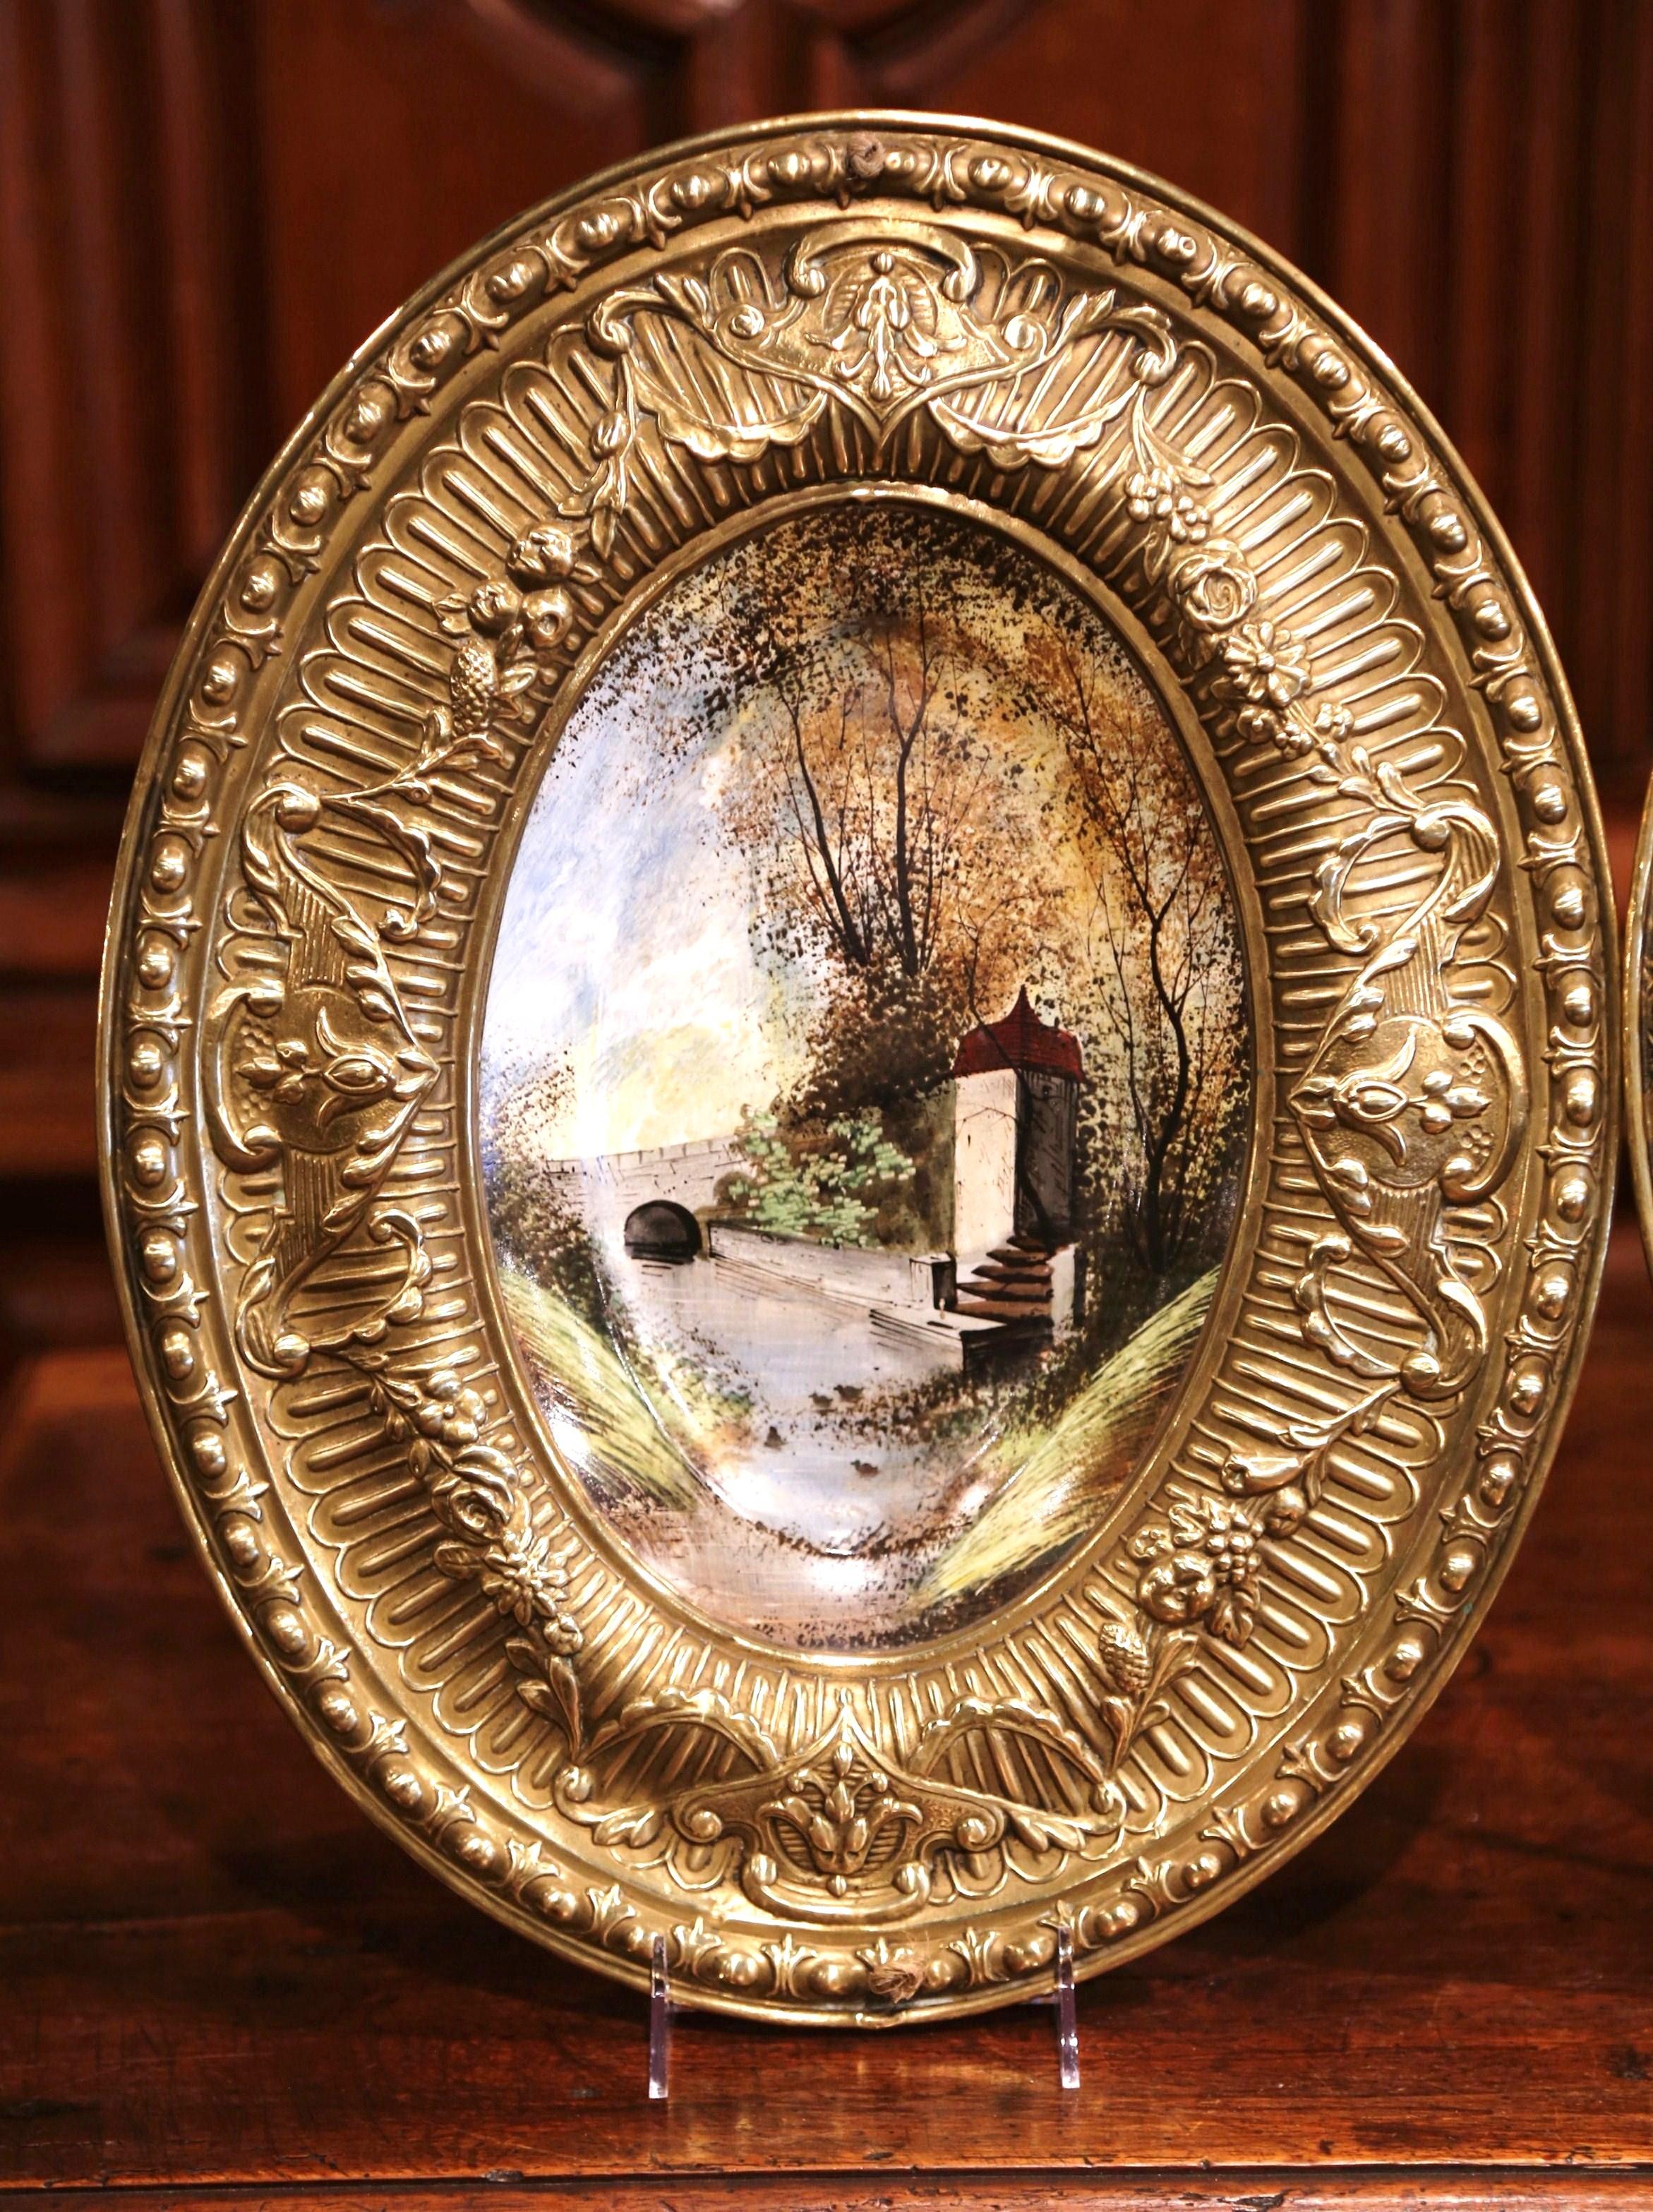 Decorate a den or game room with this pair of antique oval wall plaques. Crated in France circa 1870, each porcelain composition is set inside a repousse brass frame. The ceramic plaques feature hand painted landscape scenes with chateau, trees,